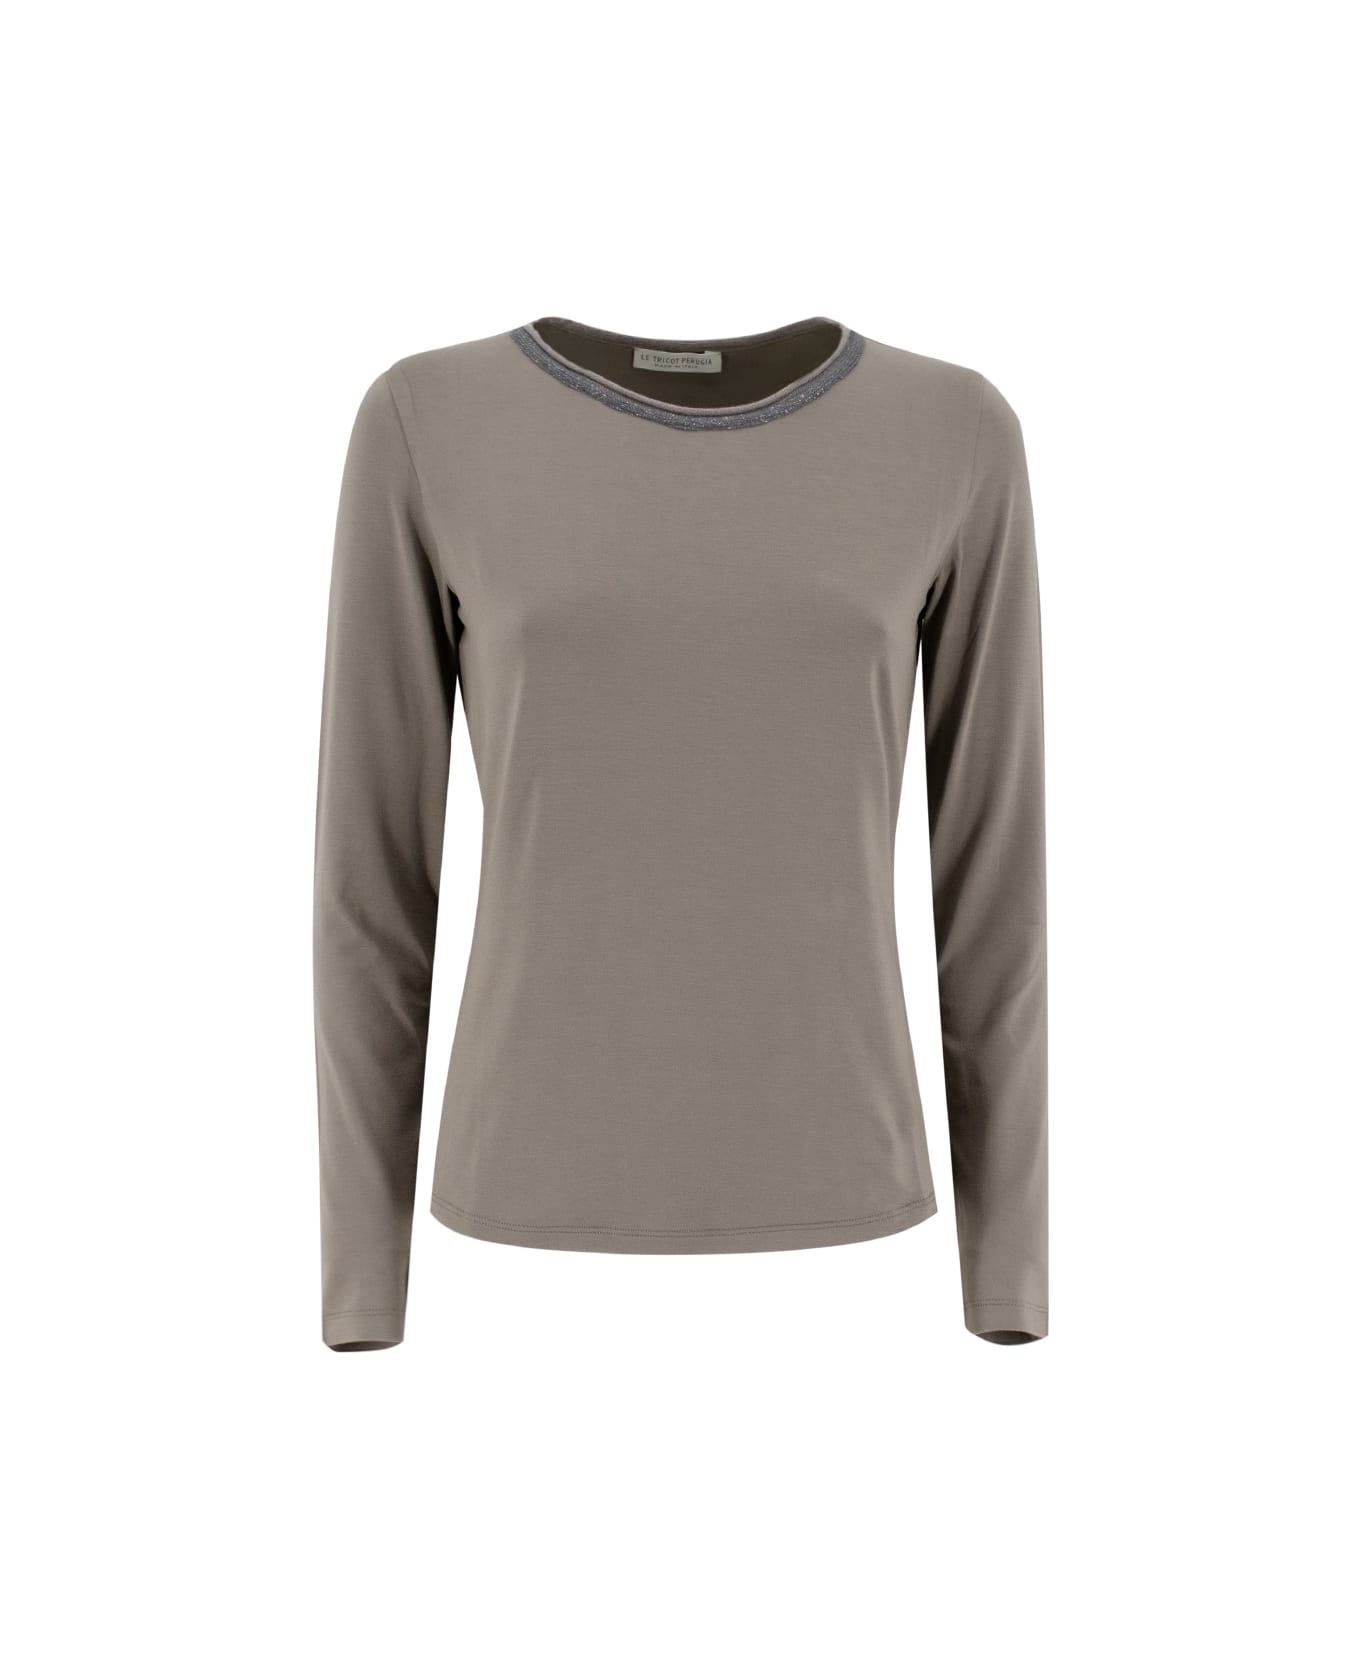 Le Tricot Perugia Sweater - TAUPE/AUPE/D.GREY